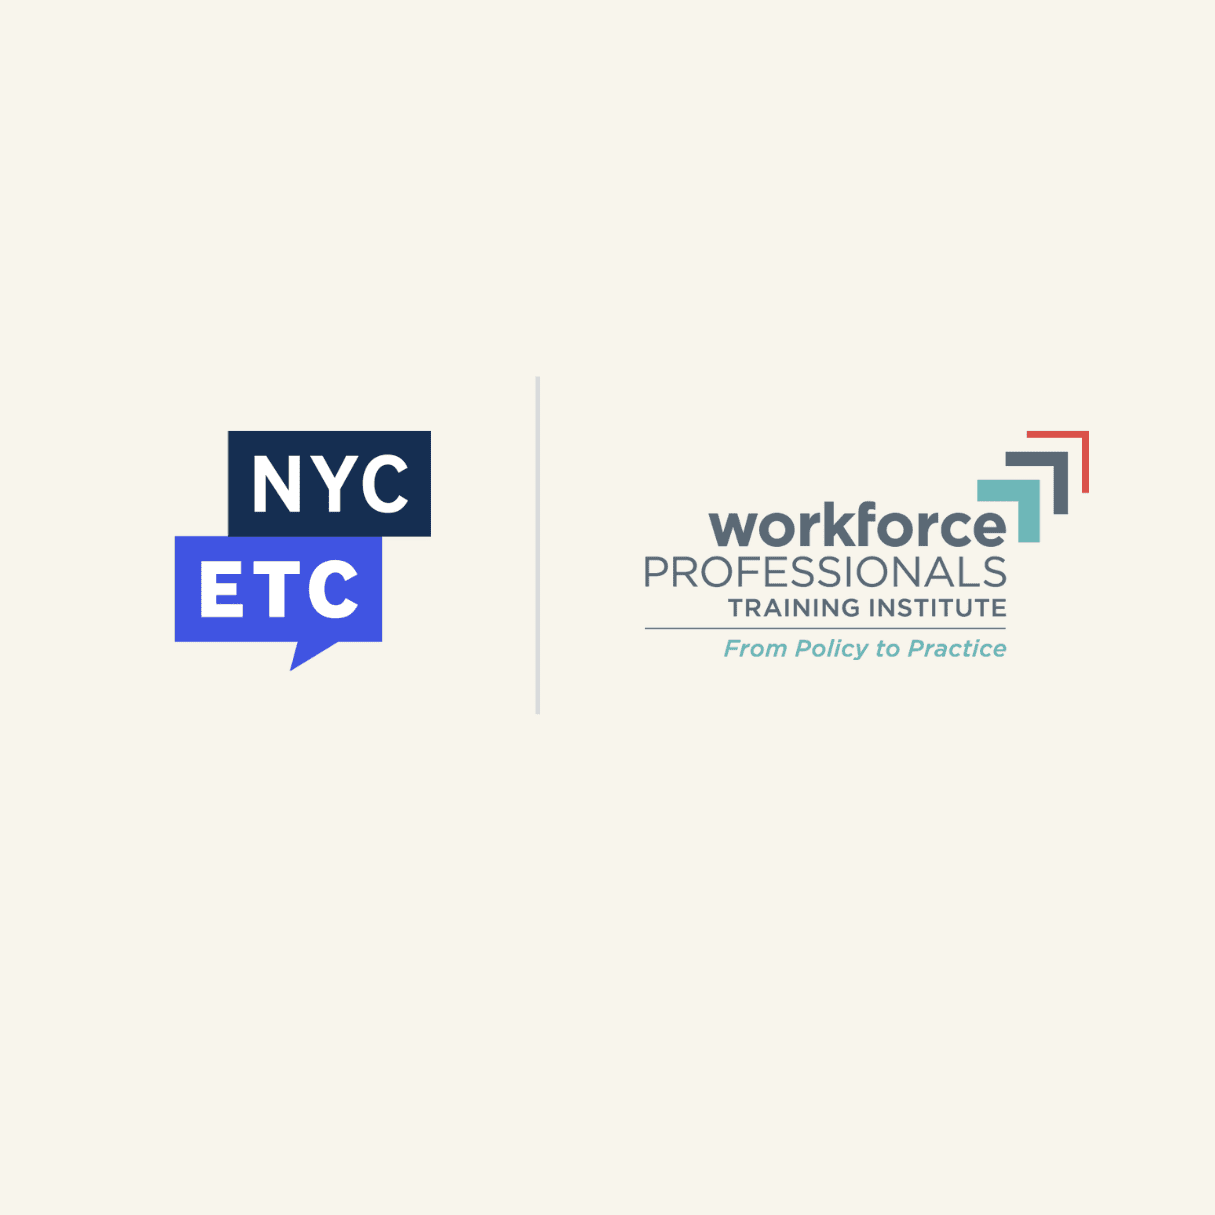 nycetc and WPTI